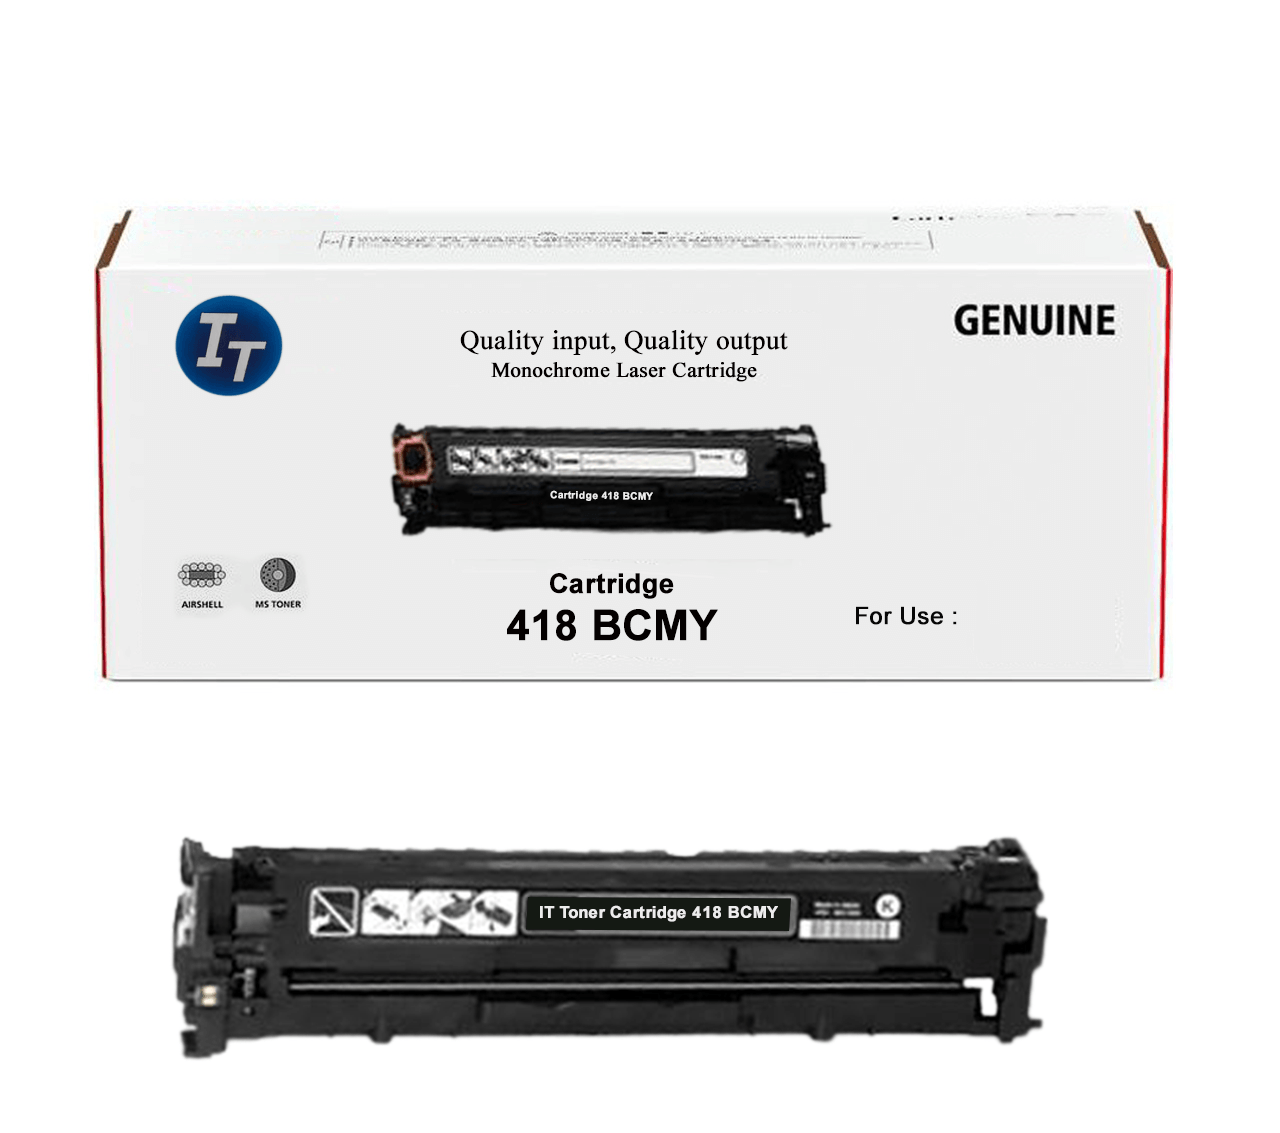 IT Toner Cartridge Canon 418 BCMY (7).png